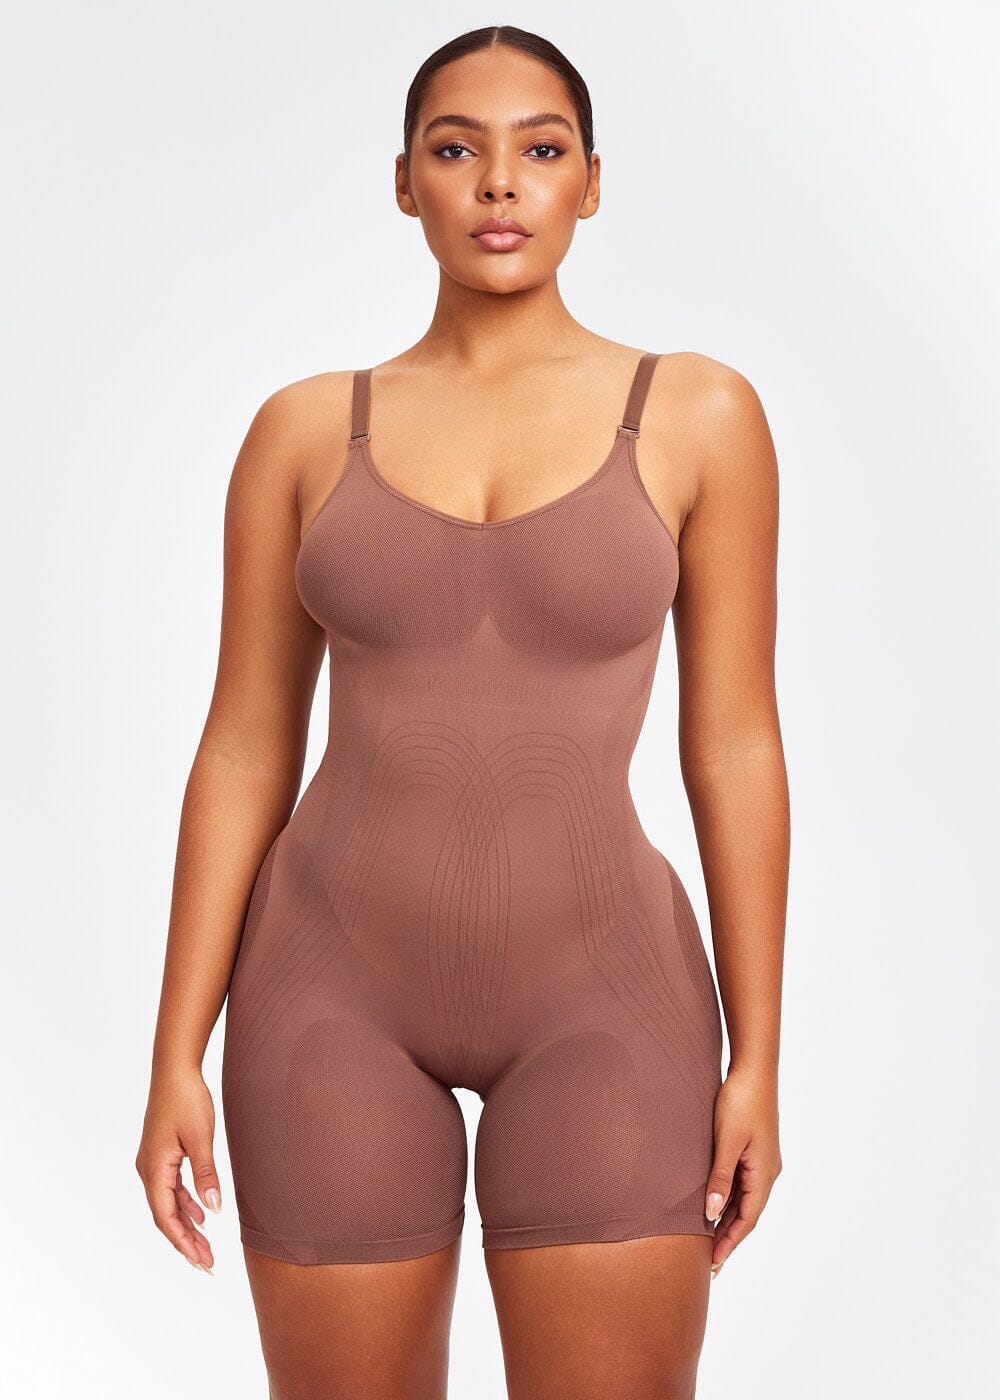 Definition & Meaning of Body suit